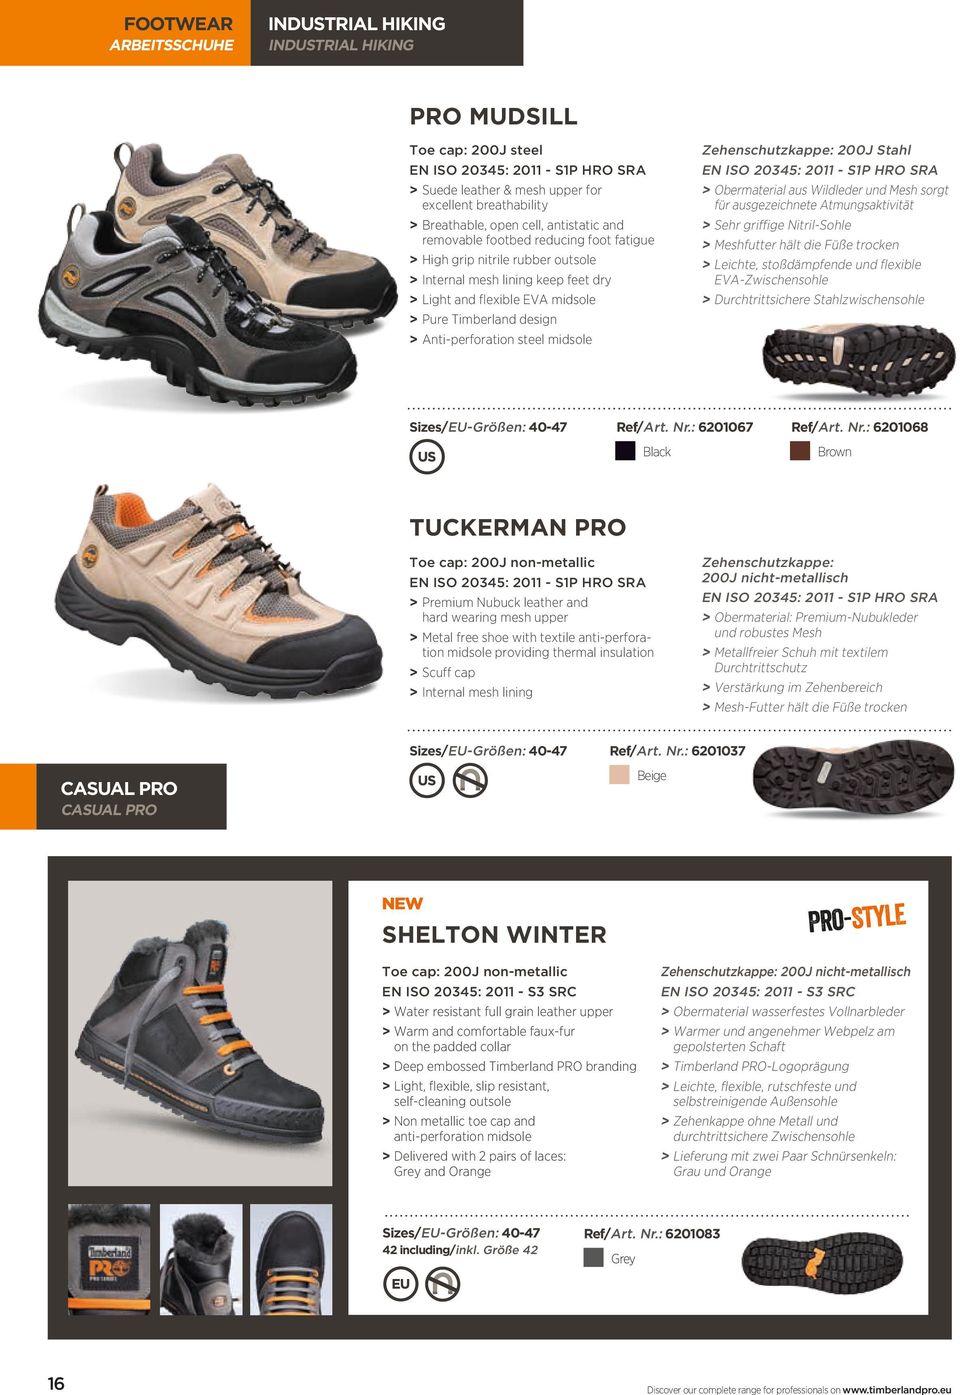 ISO 20345: 2011 - S1P HRO SRA > Suede leather & mesh upper for excellent breathability > Breathable, open cell, antistatic and removable footbed reducing foot fatigue > High grip nitrile rubber